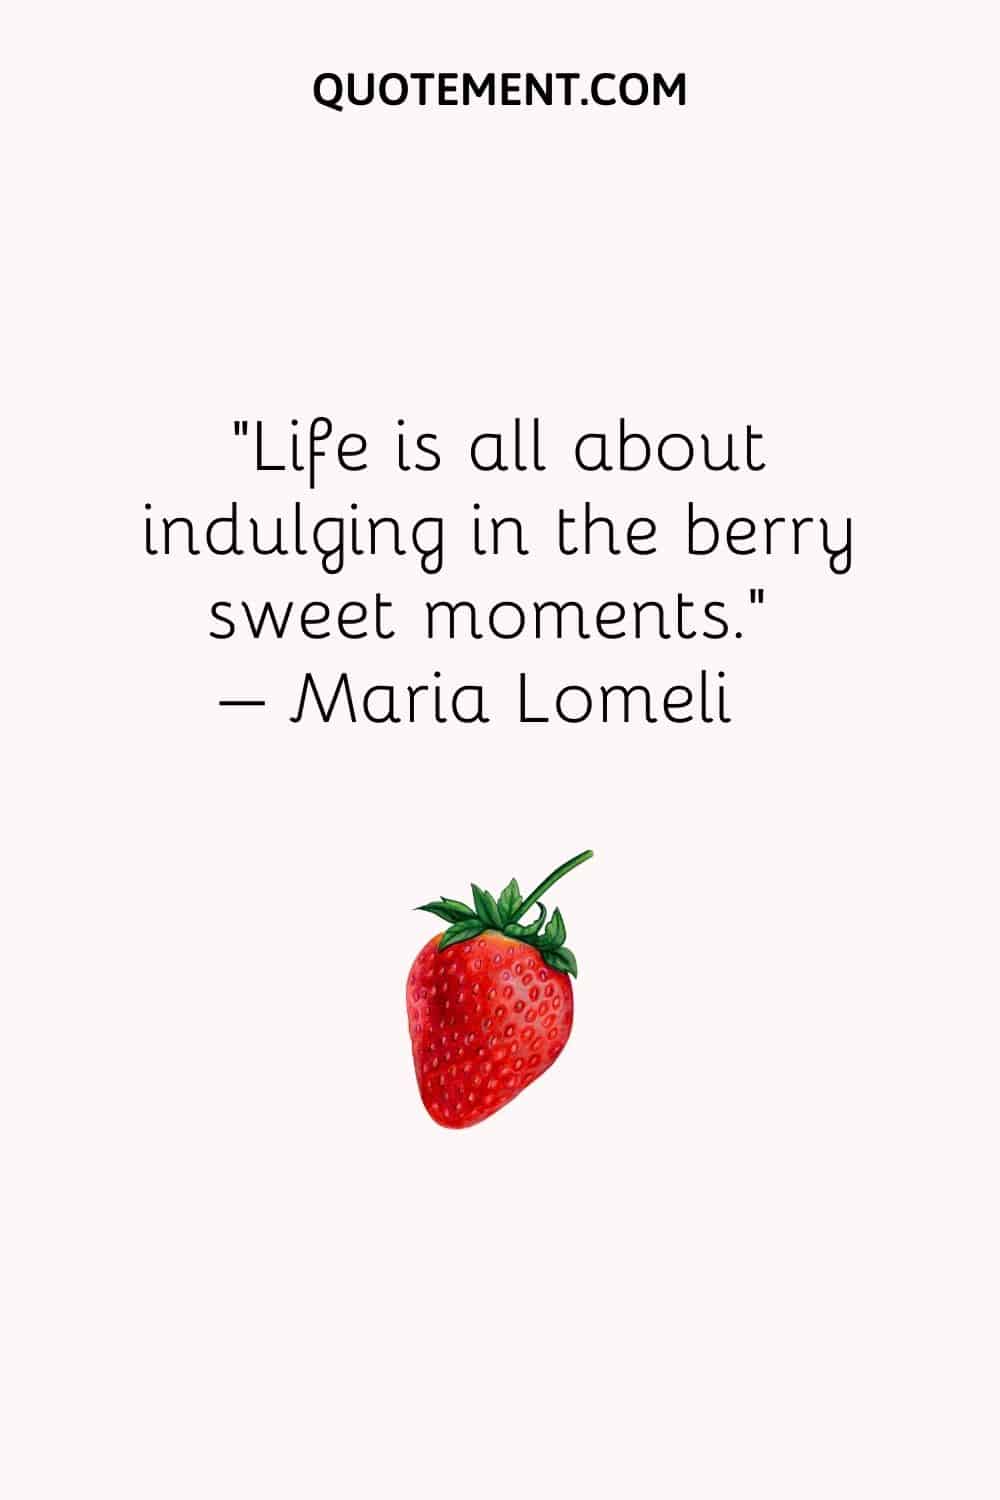 Life is all about indulging in the berry sweet moments